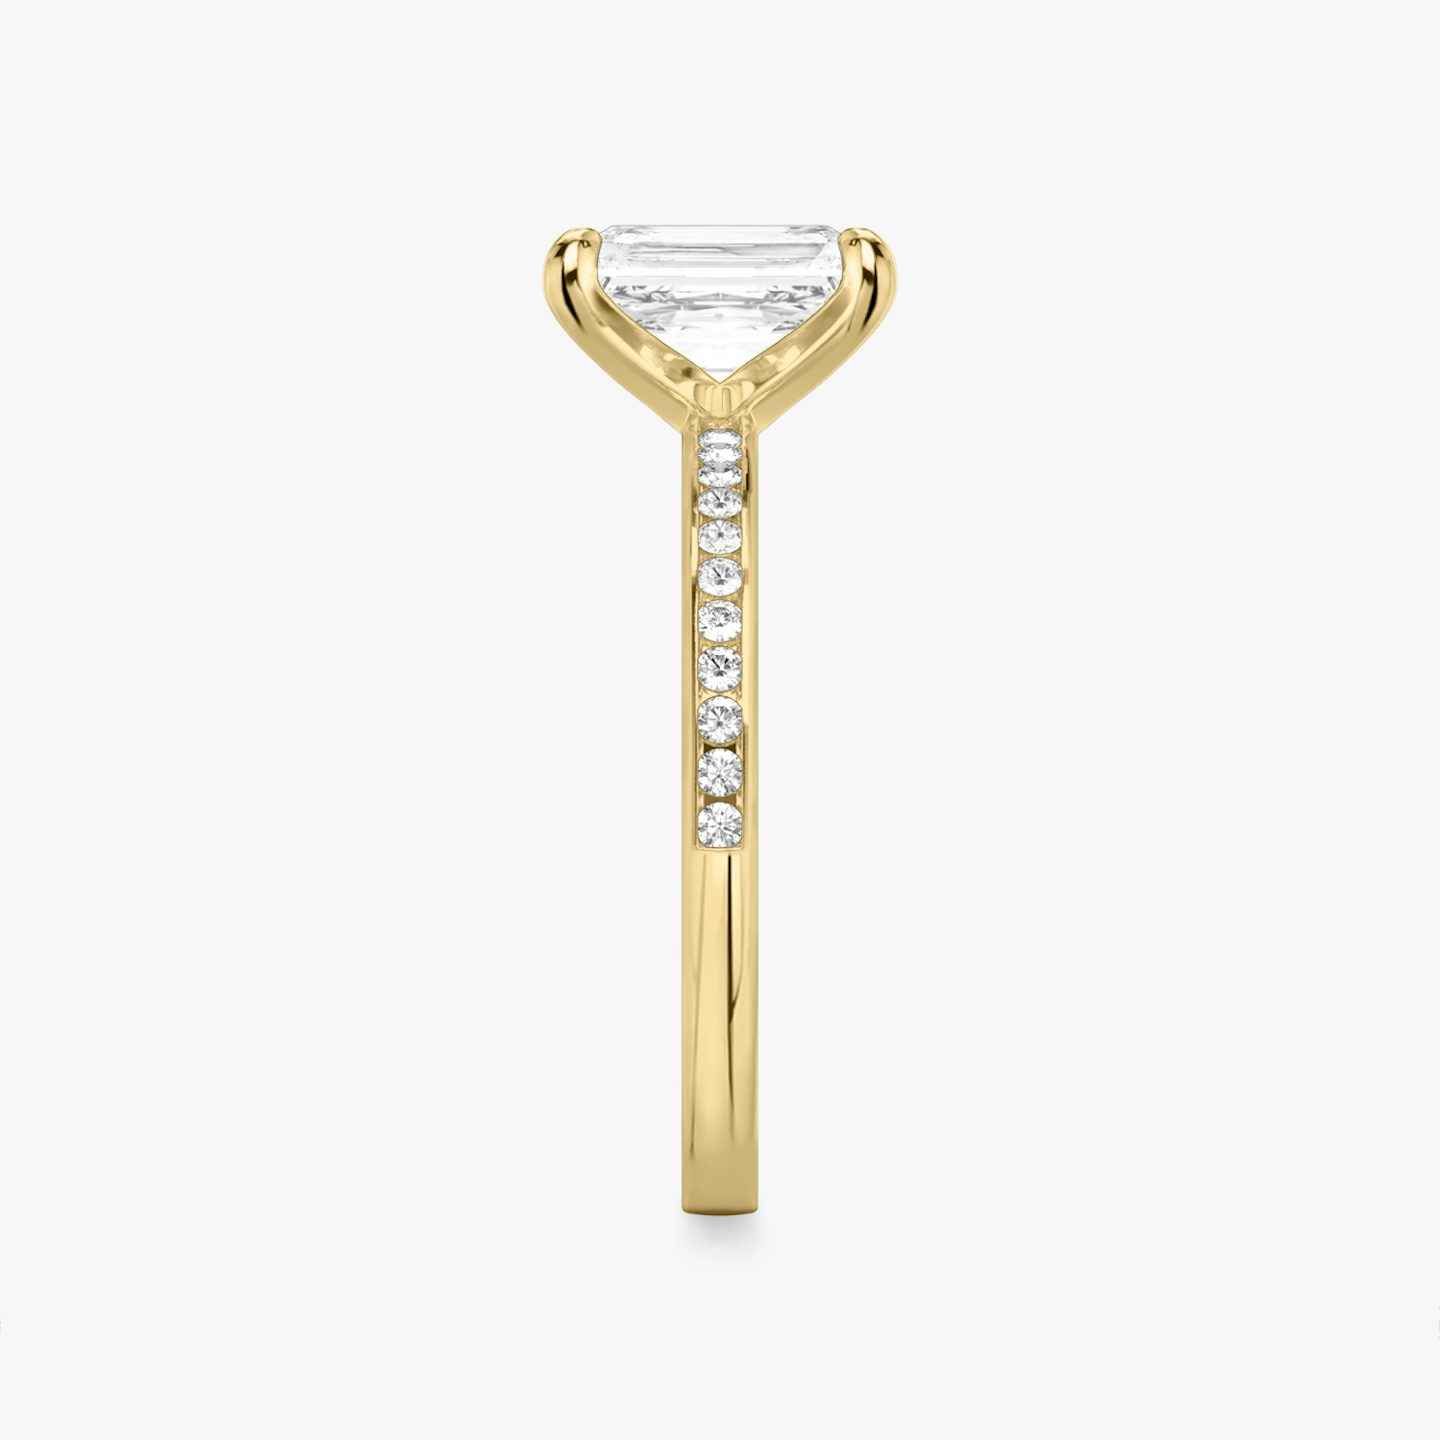 The Devotion | Radiant | 18k | 18k Yellow Gold | Band stone shape: Round Brilliant | Band: Original | Diamond orientation: vertical | Carat weight: See full inventory